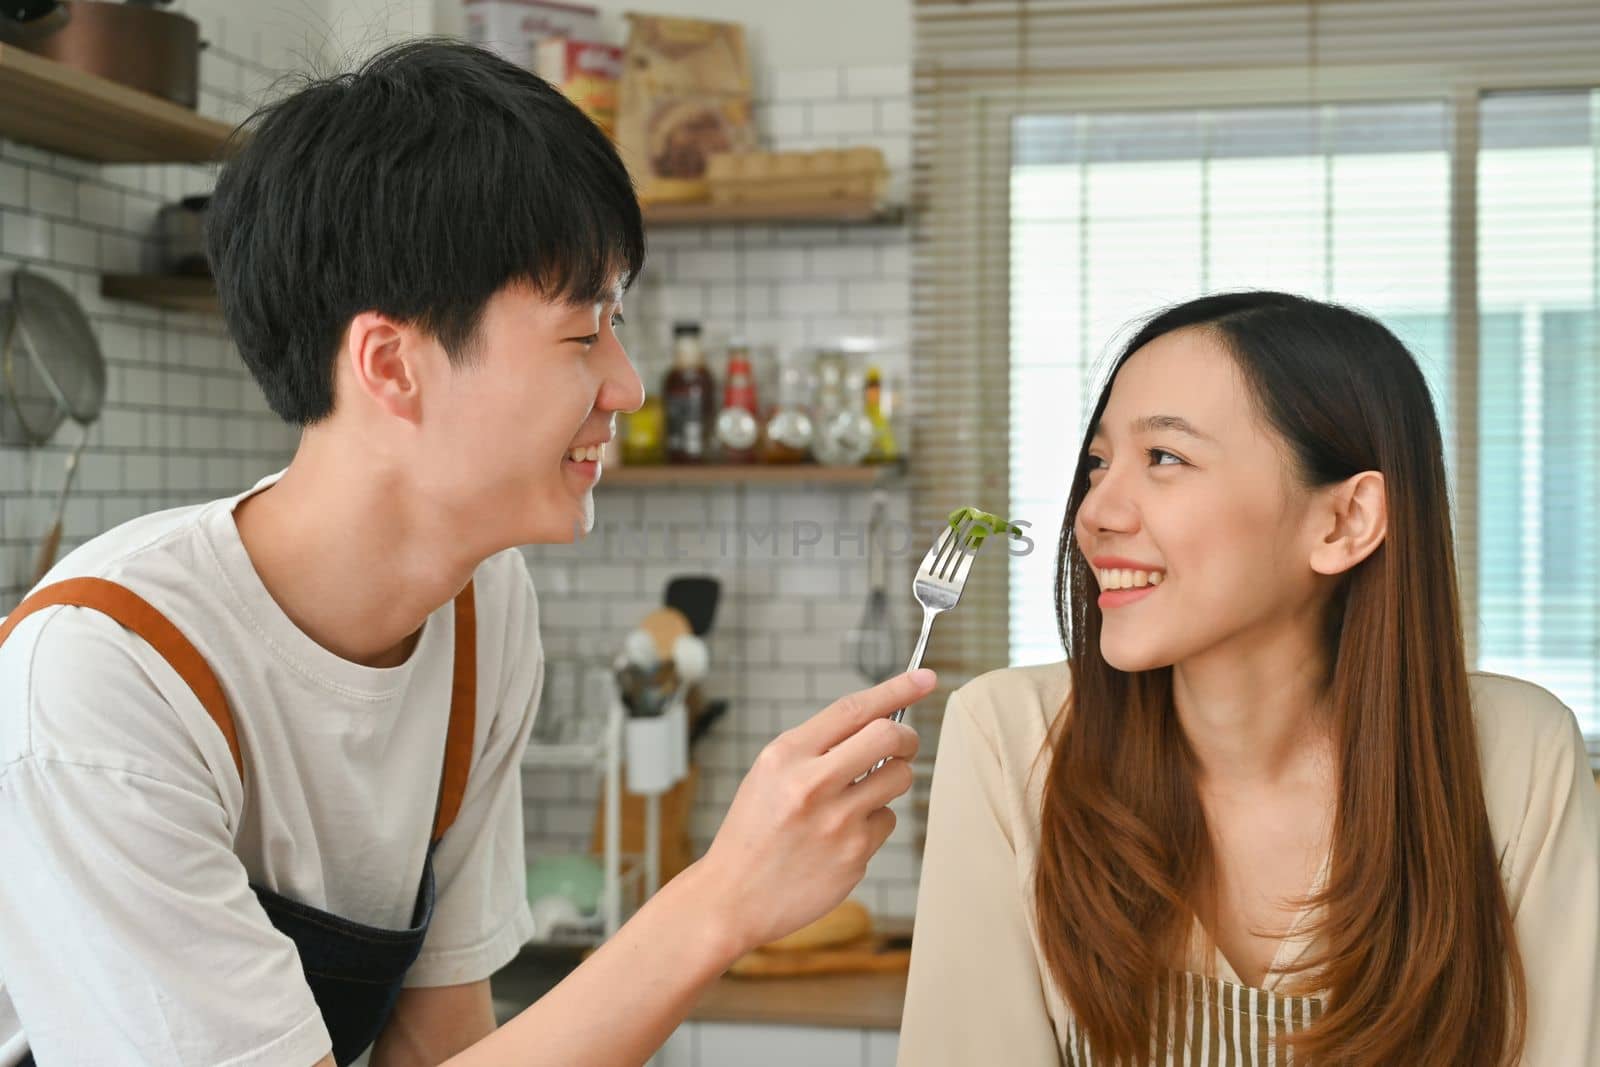 Happy young couple eating vegetable vegetarian salad together in the kitchen. Family moments, healthy lifestyle concept.